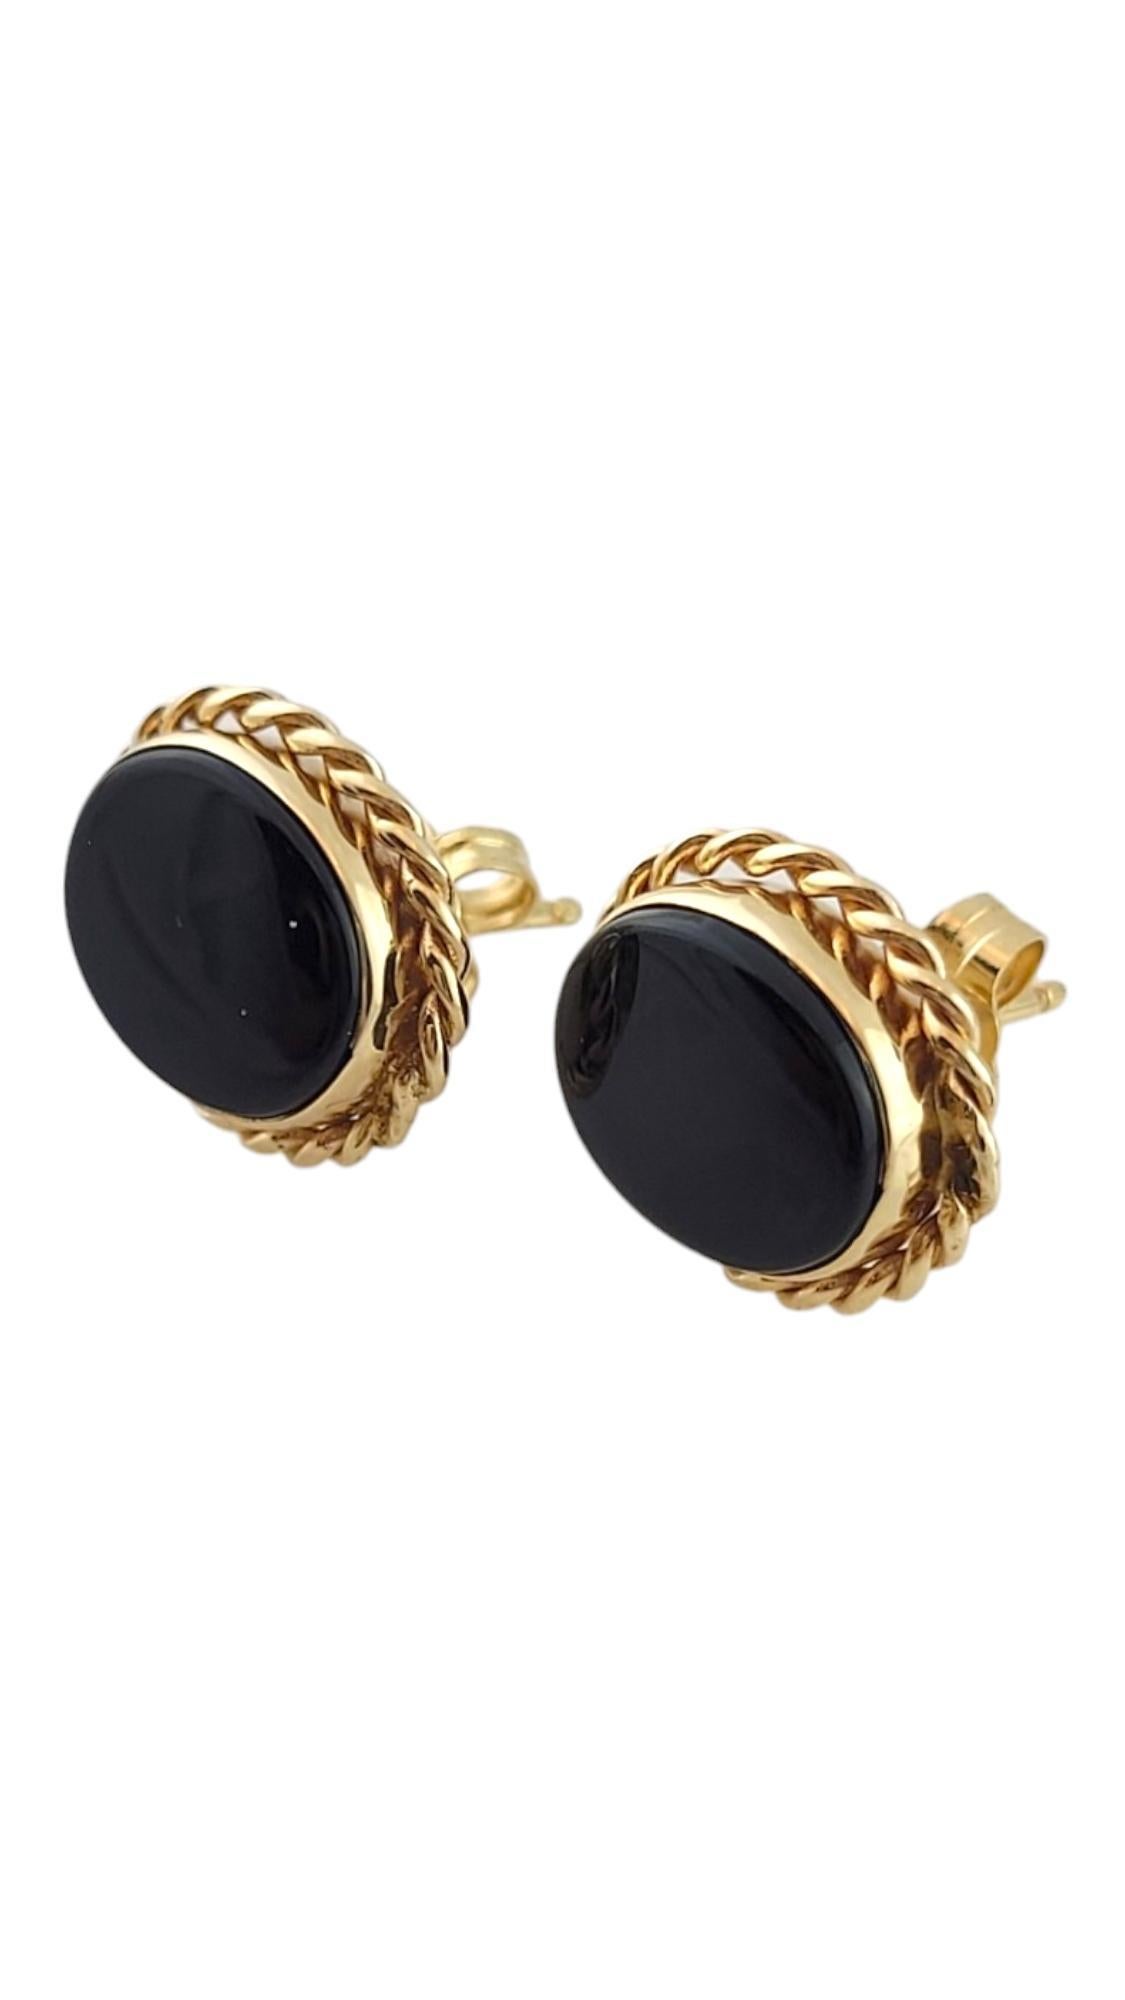 Vintage 14K Yellow Gold Onyx Earrings

These earrings feature an oval onyx bezel set, set in 14K yellow gold surrounded by a gold roped pattern!

Size: 12.55mm X 10.70mm X 3.64mm

Weight: 1.64 dwt/ 2.56 g

Tested 14K 

Very good condition,